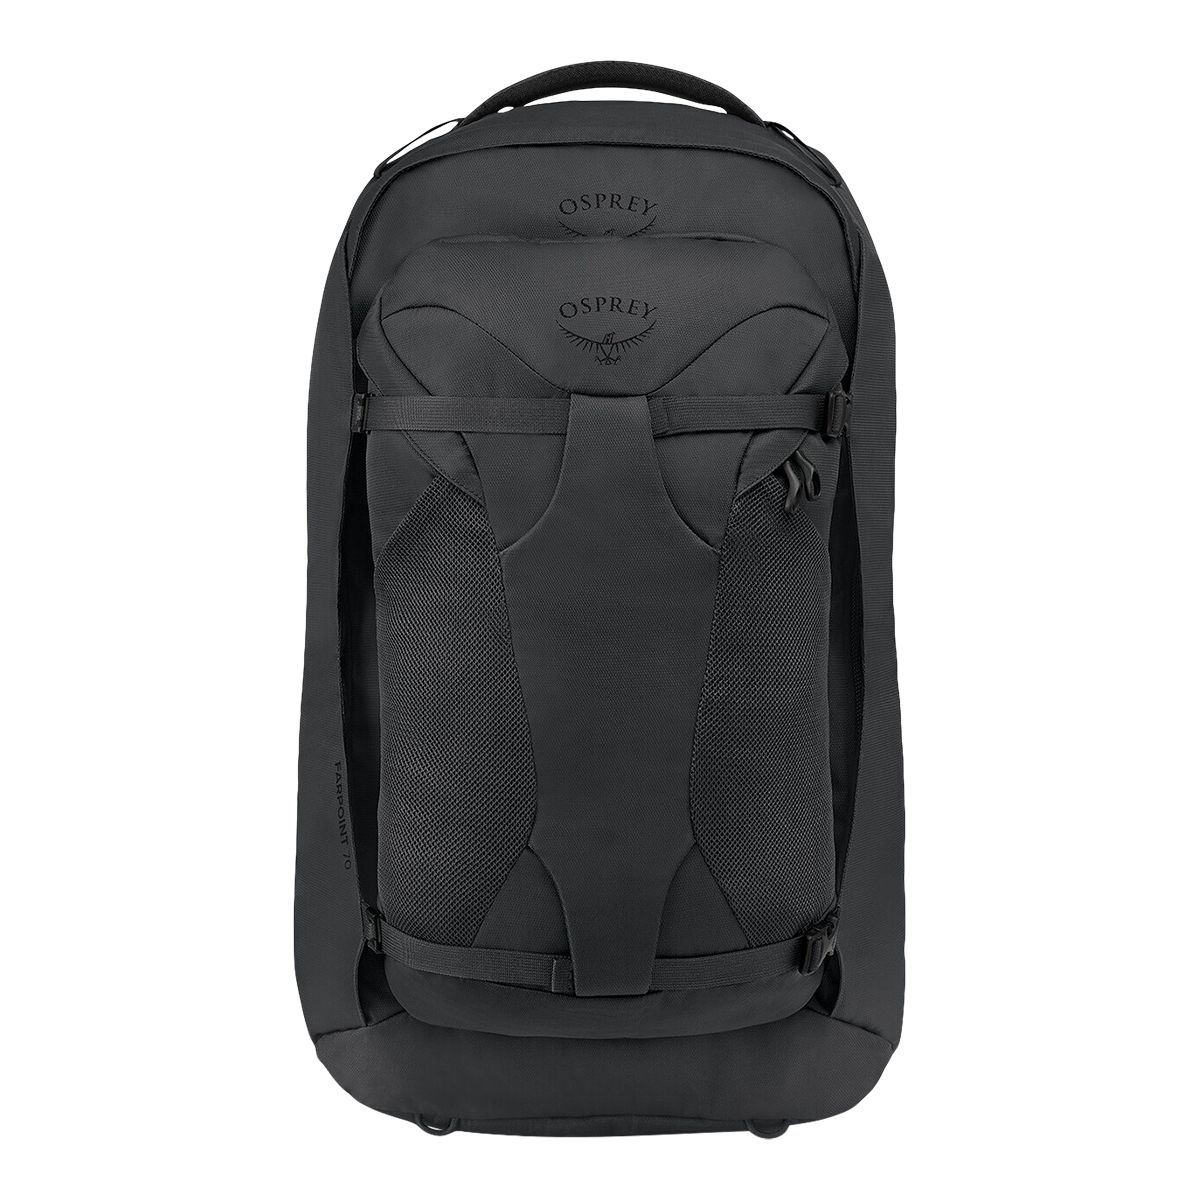 Shop Osprey Canada Backpacks Bags and Suitcases Online  SAIL